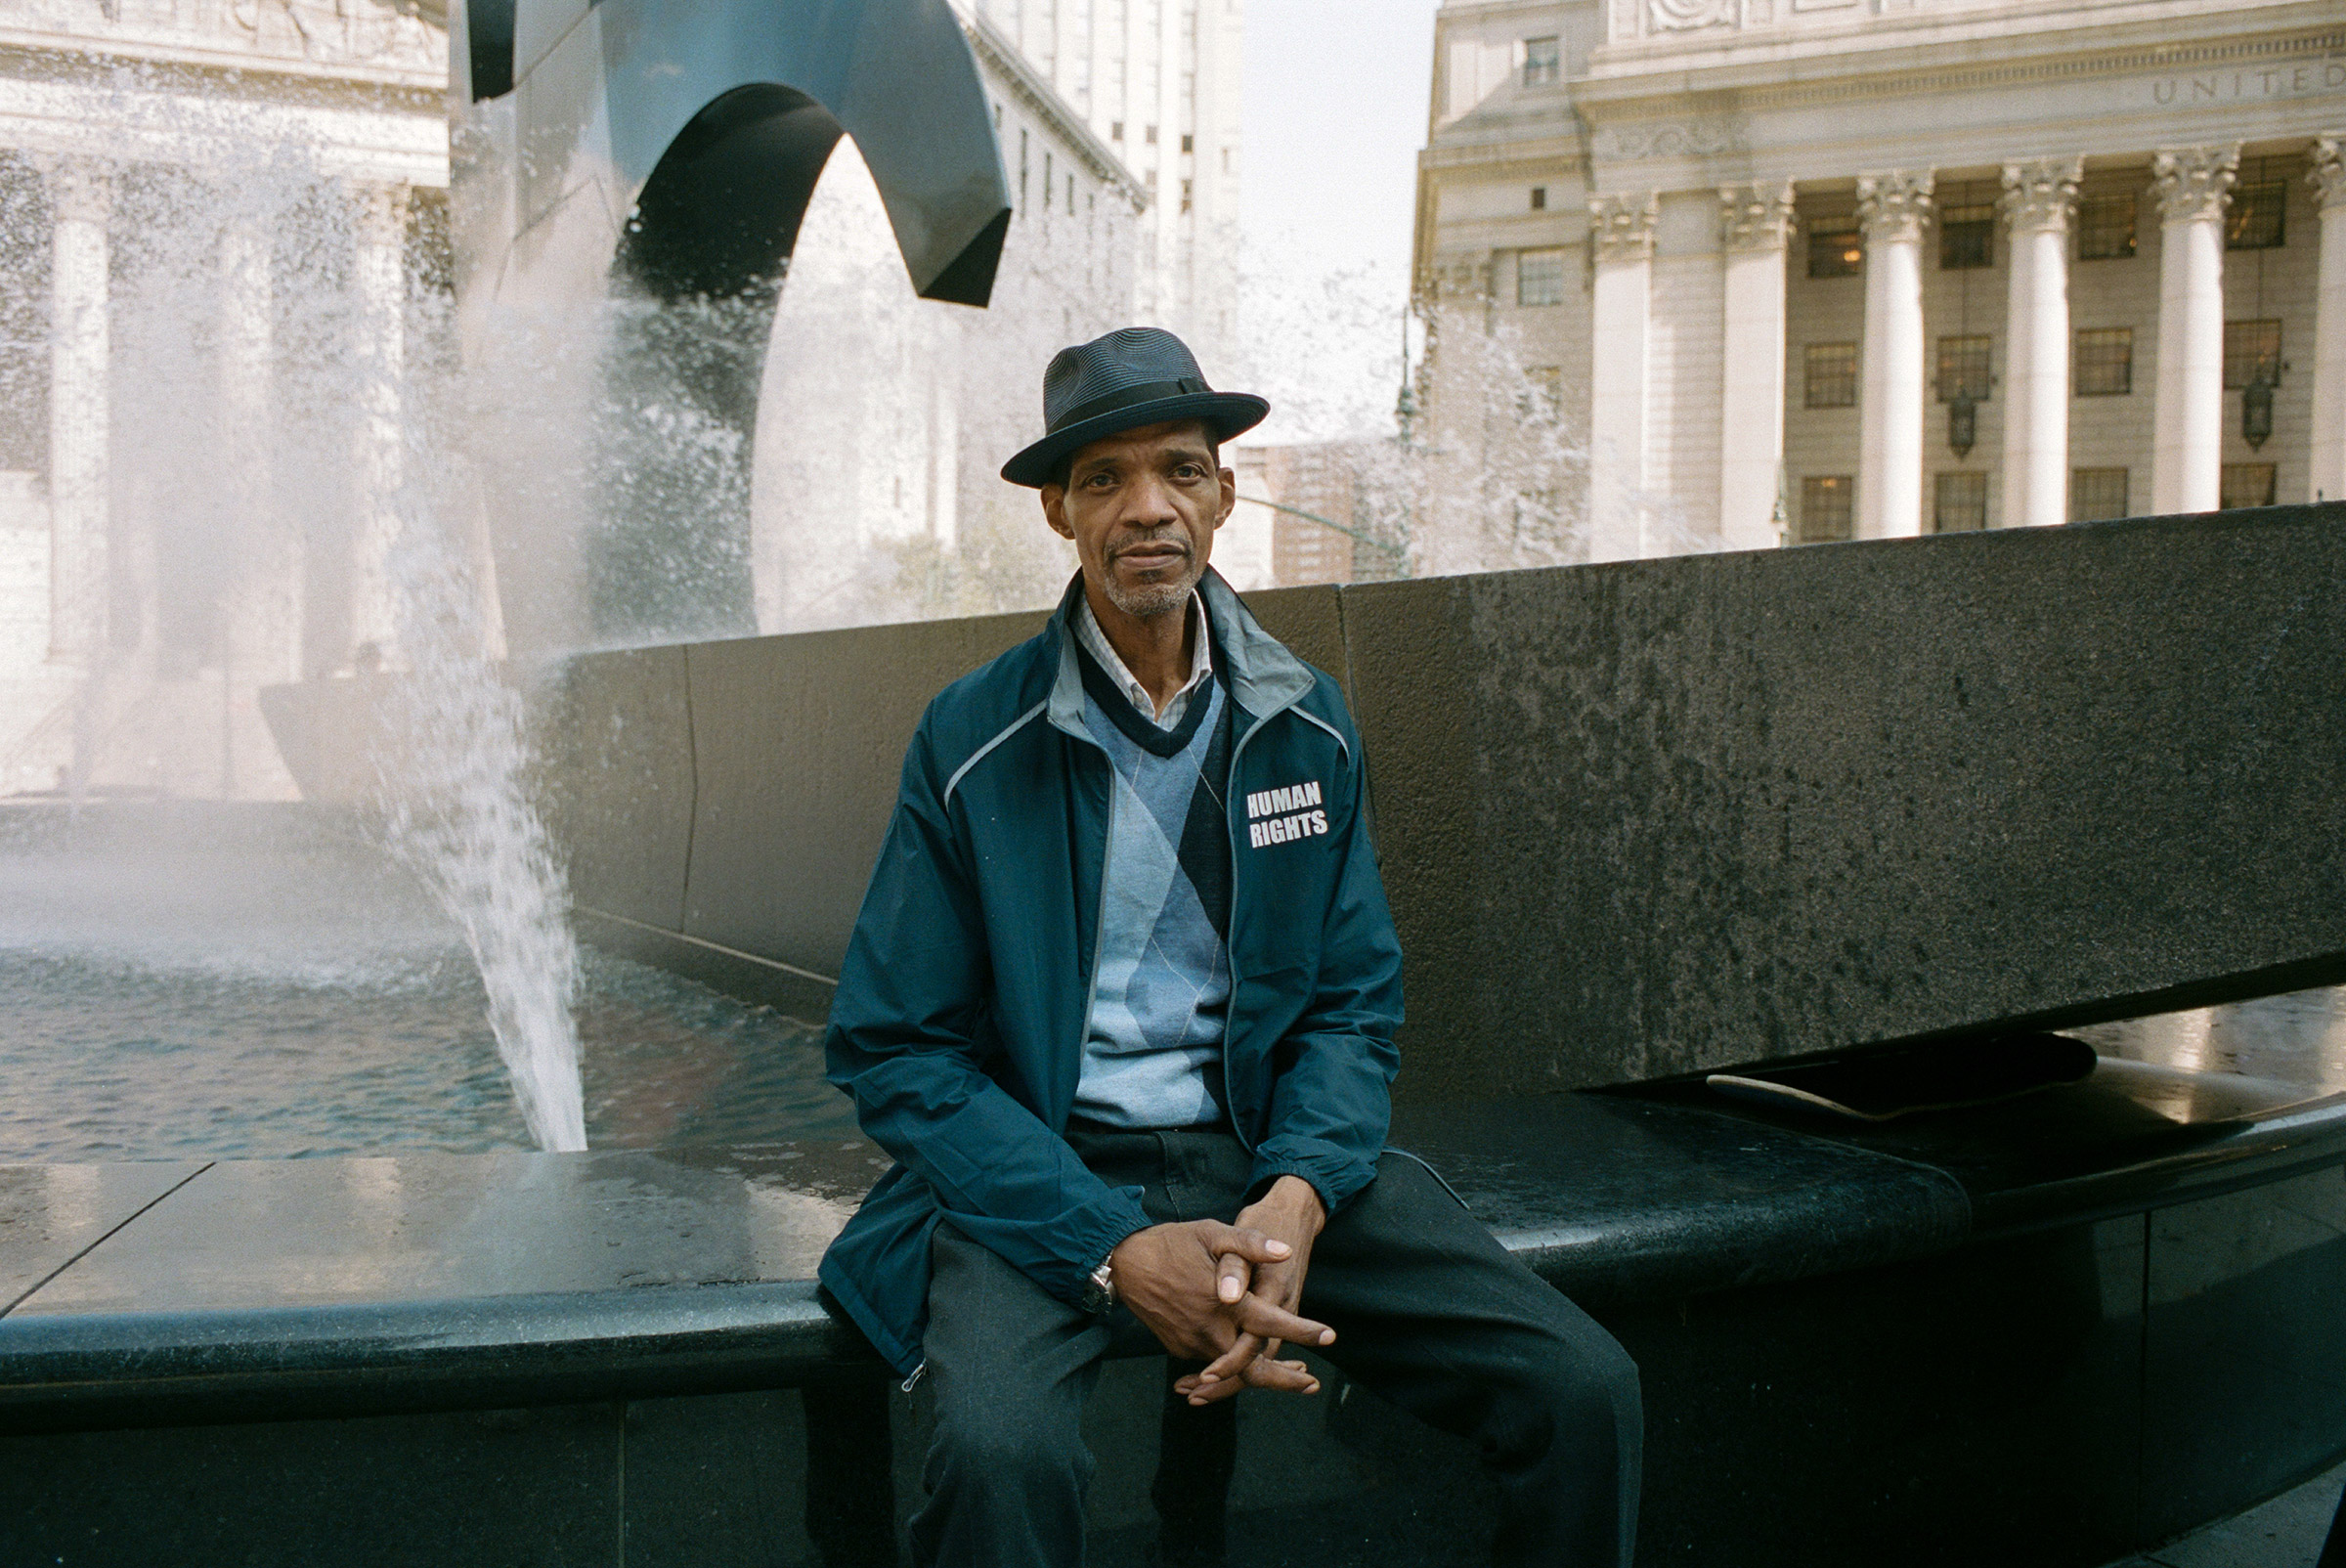 A human rights advocate at the Foley Square fountain, Aug. 27, 2021. (Daniel Arnold for tIME)